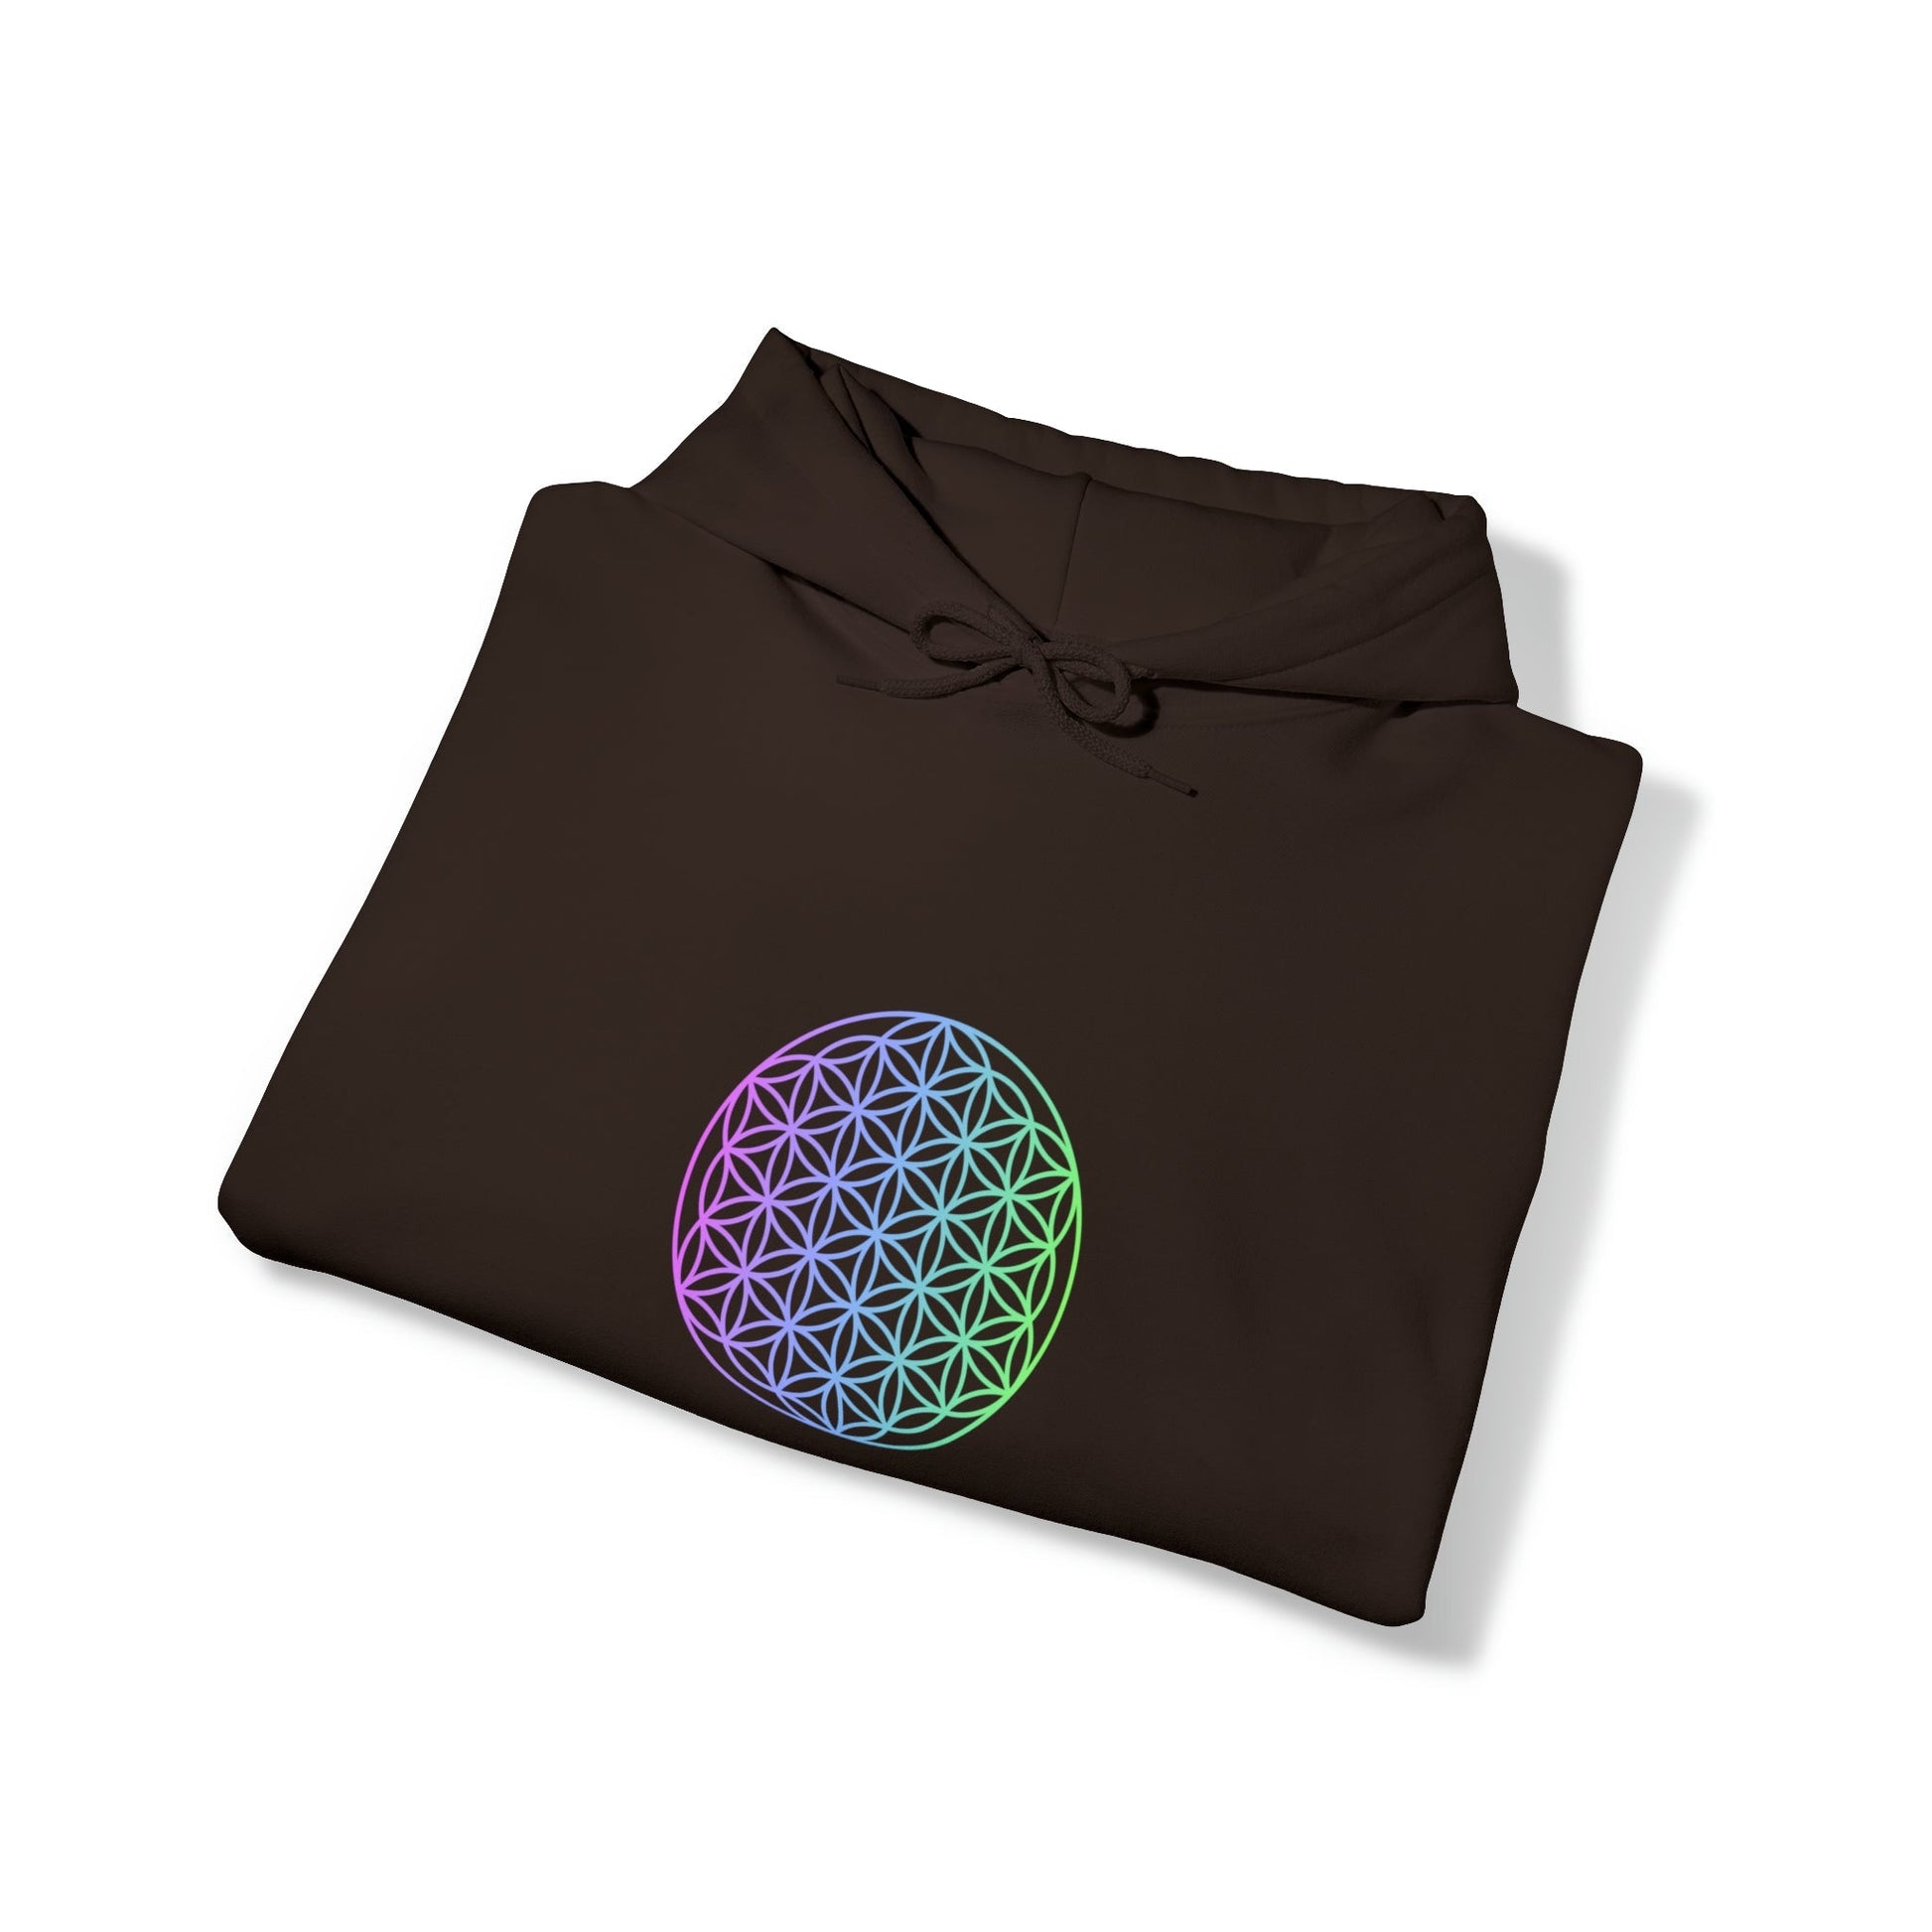 Dear Person in Front of Me... Flower of Life Hooded Sweatshirt - Premium Hoodie from Printify - Shop now at Crystals and Sun Signs Co